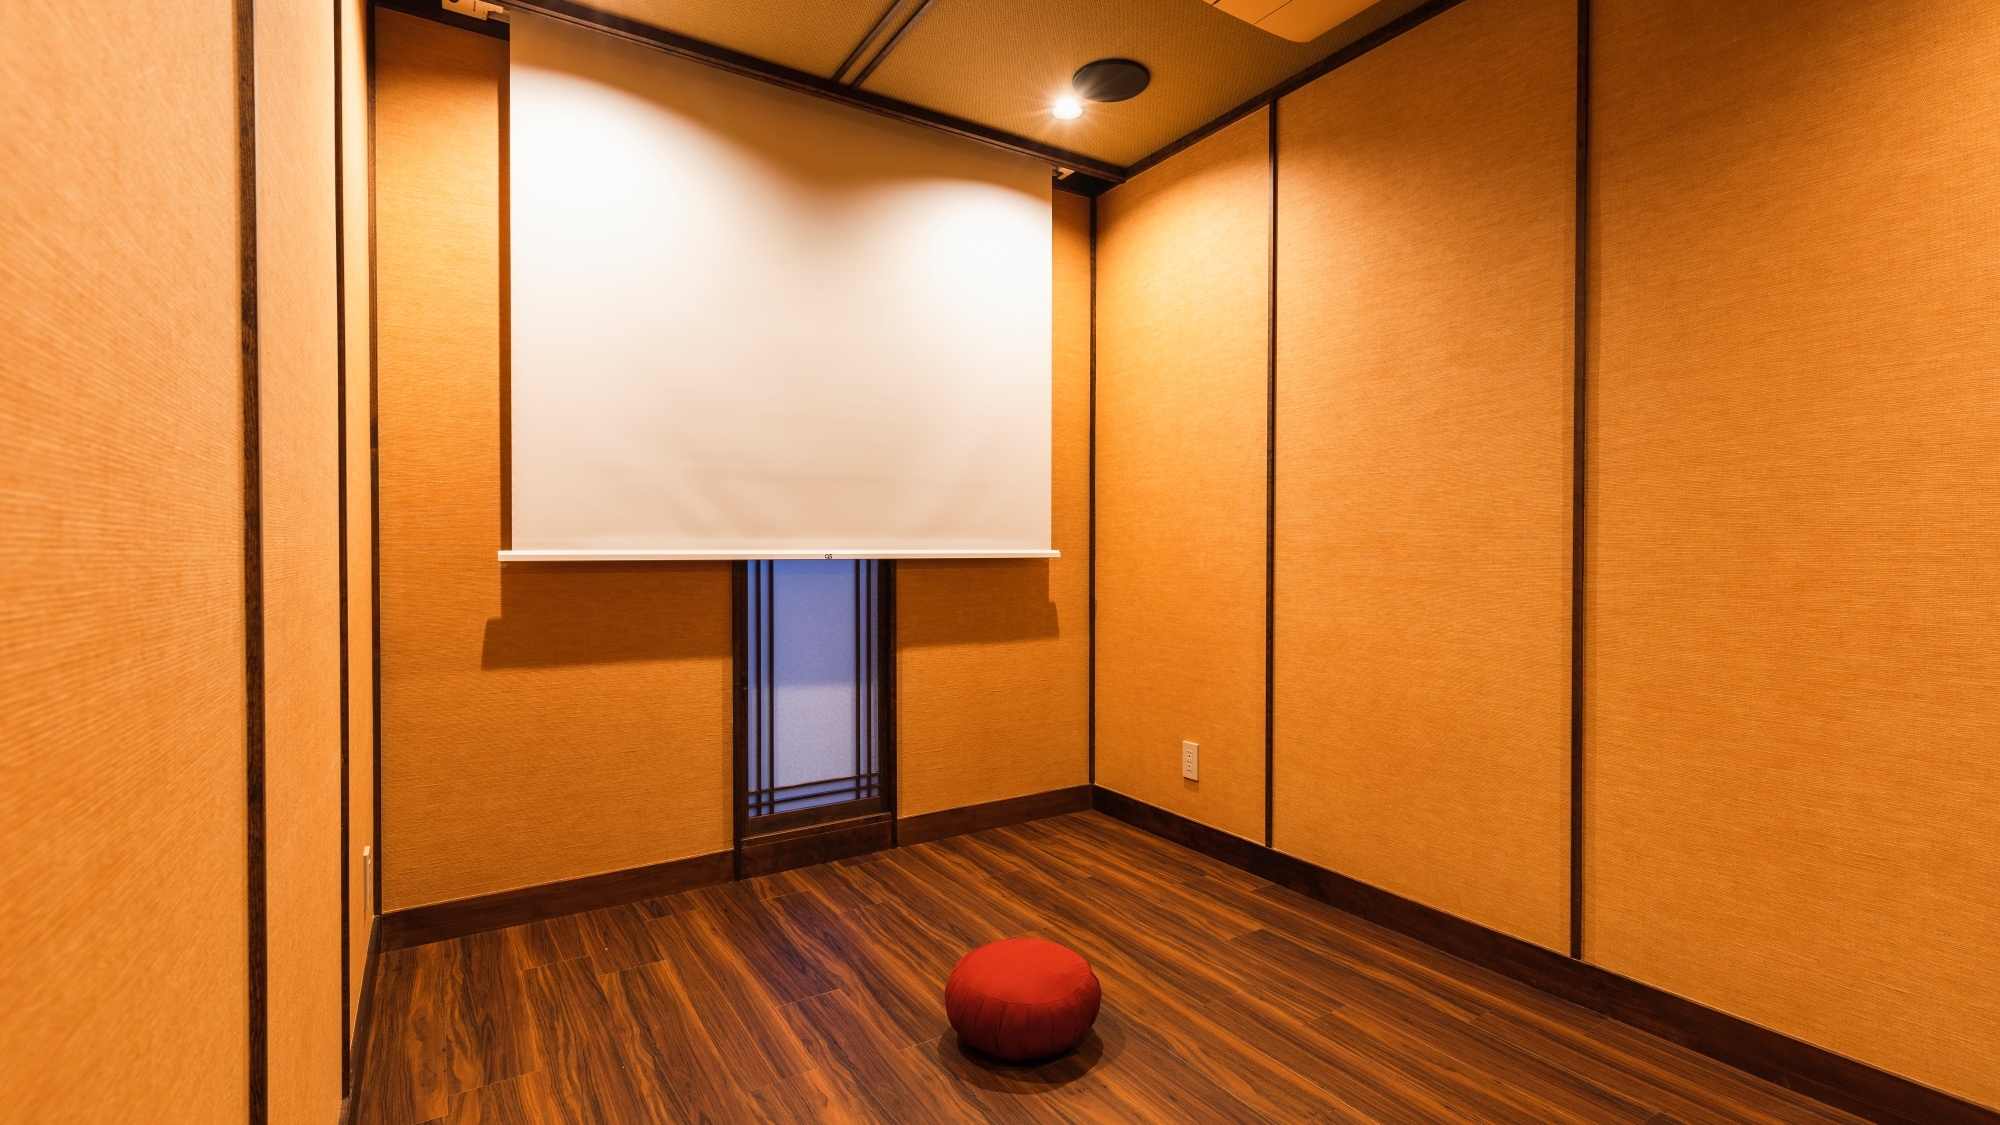 [Annex "Geckkan"] The meditation room is equipped with a projector for yoga and meditation.